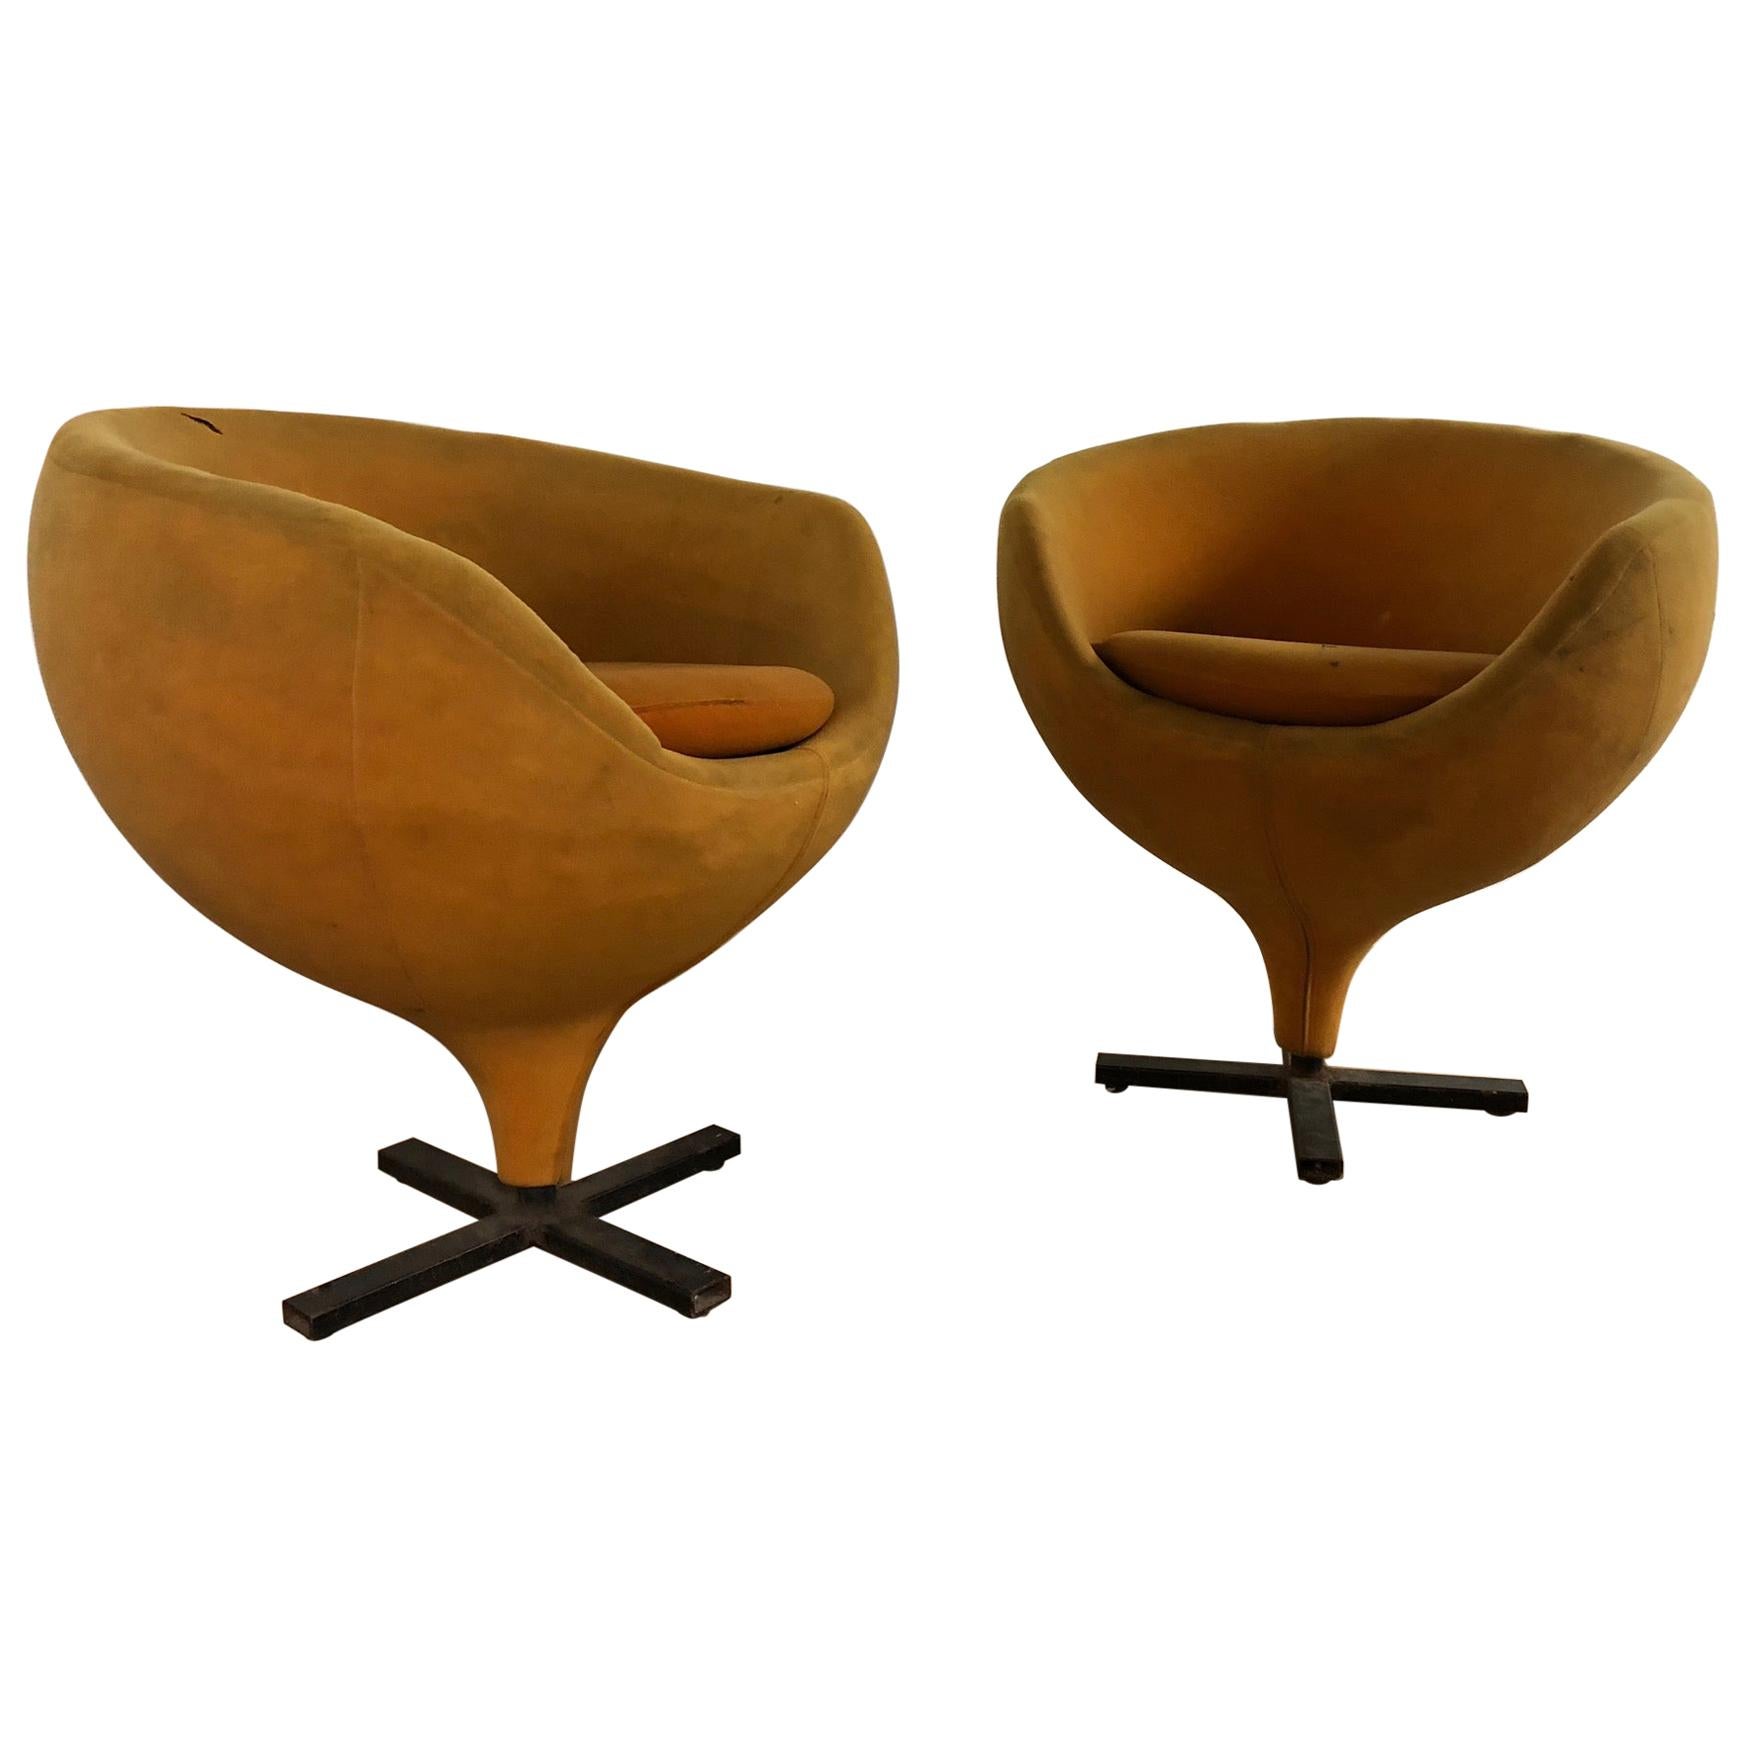 Pair of "Luna" Chairs by Pierre Guariche for Meurop, France, 1960s